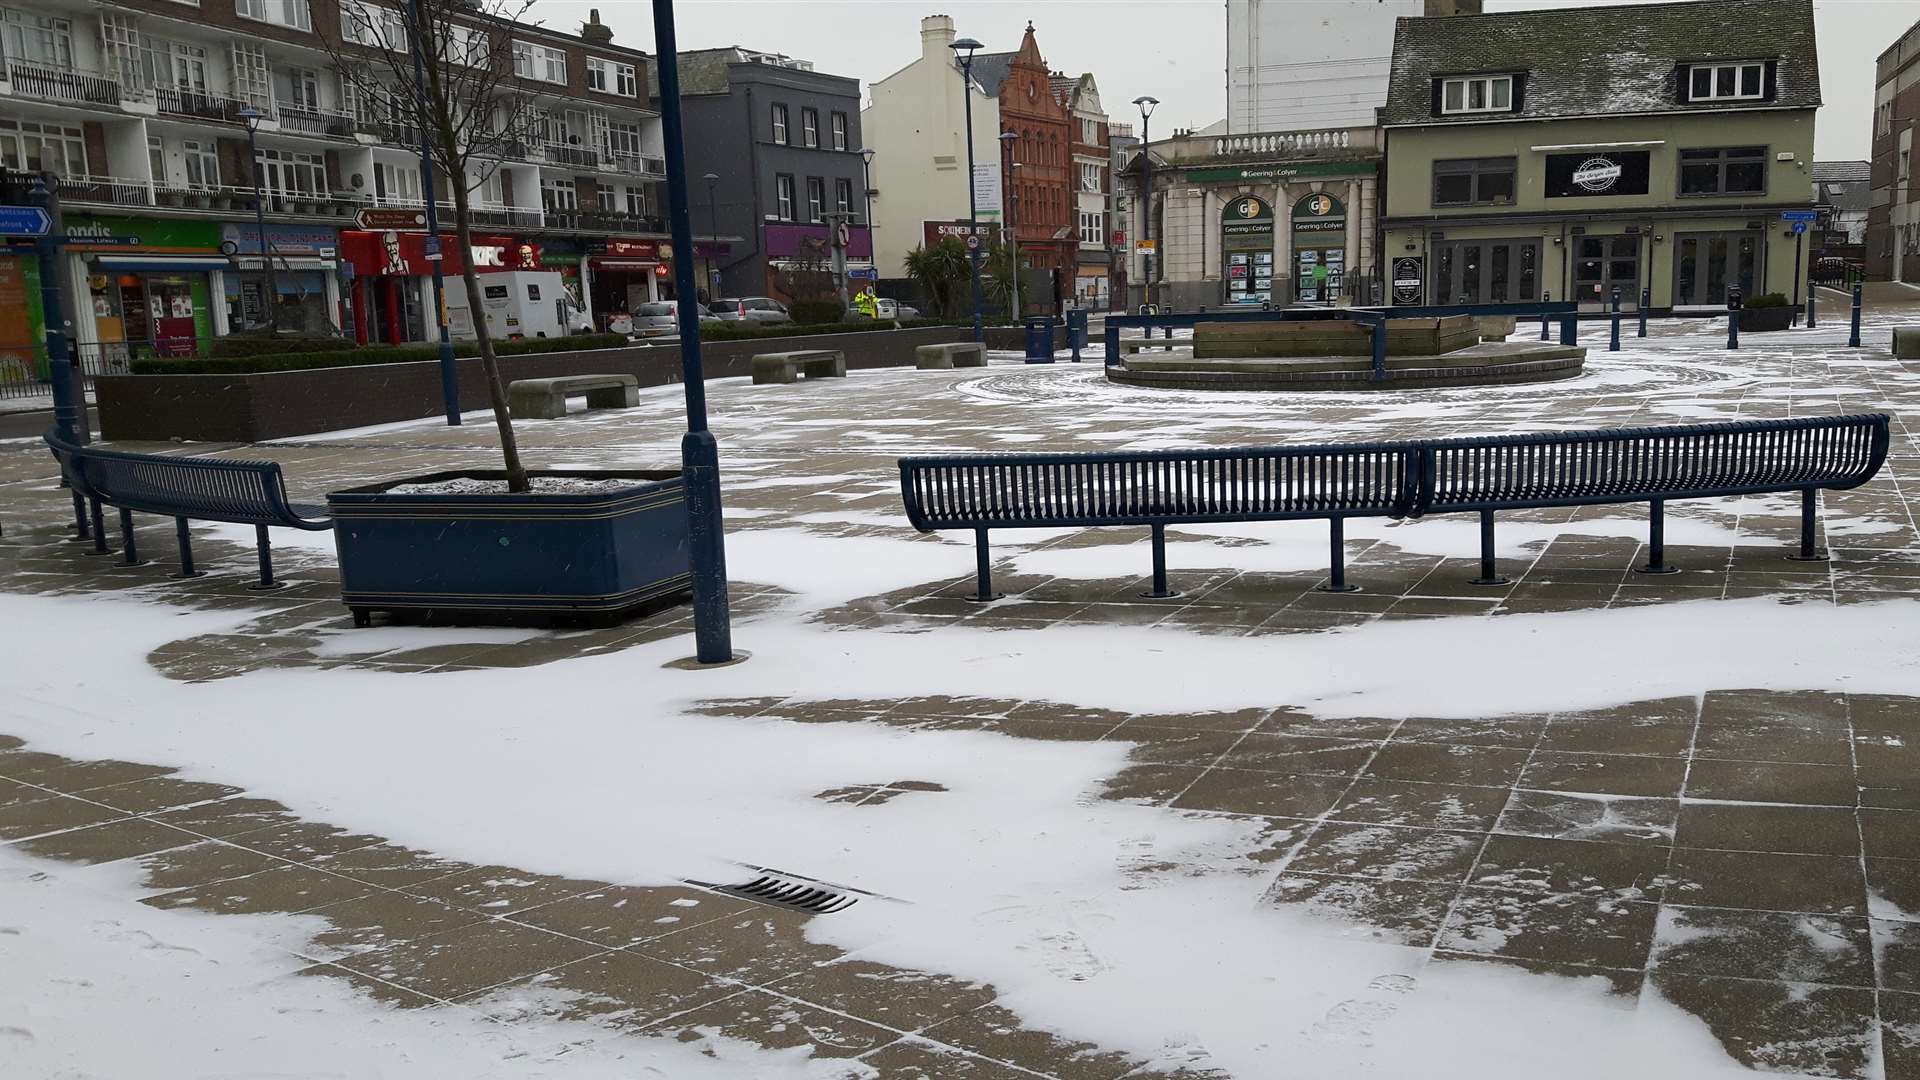 Market Square, Dover, had only a few splatterings of the white stuff